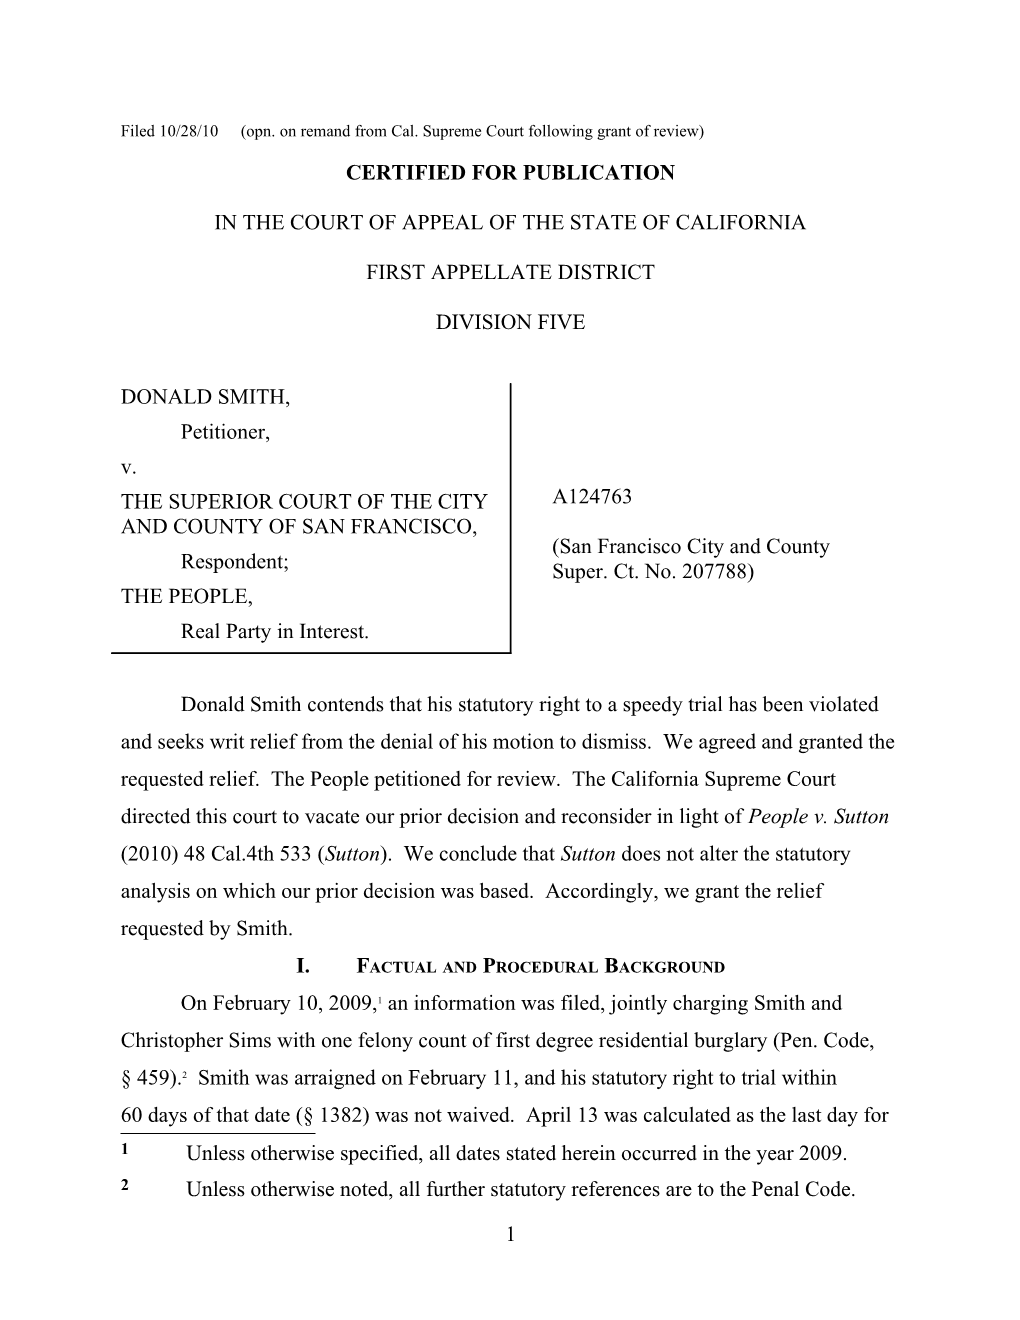 Filed 10/28/10(Opn. on Remand from Cal. Supreme Court Following Grant of Review)